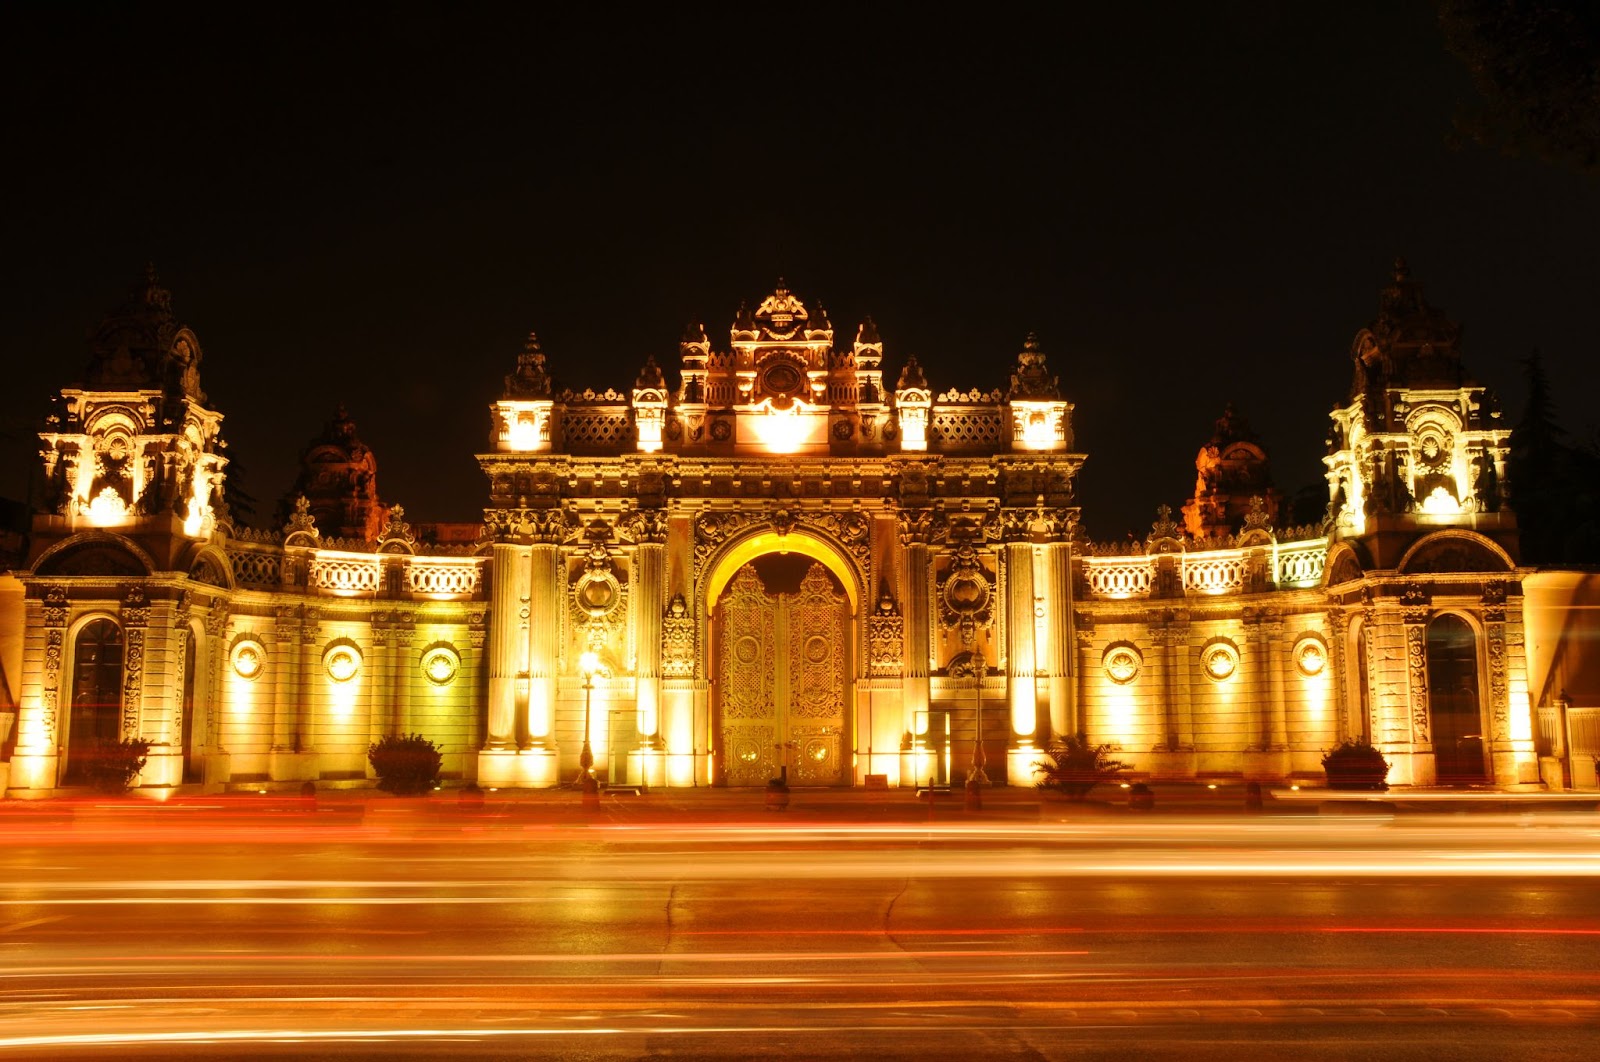 The entrance of Ottoman Empires Dolmabahce palace, Istanbul, Turkey. Best Tourist Attraction in Istanbul